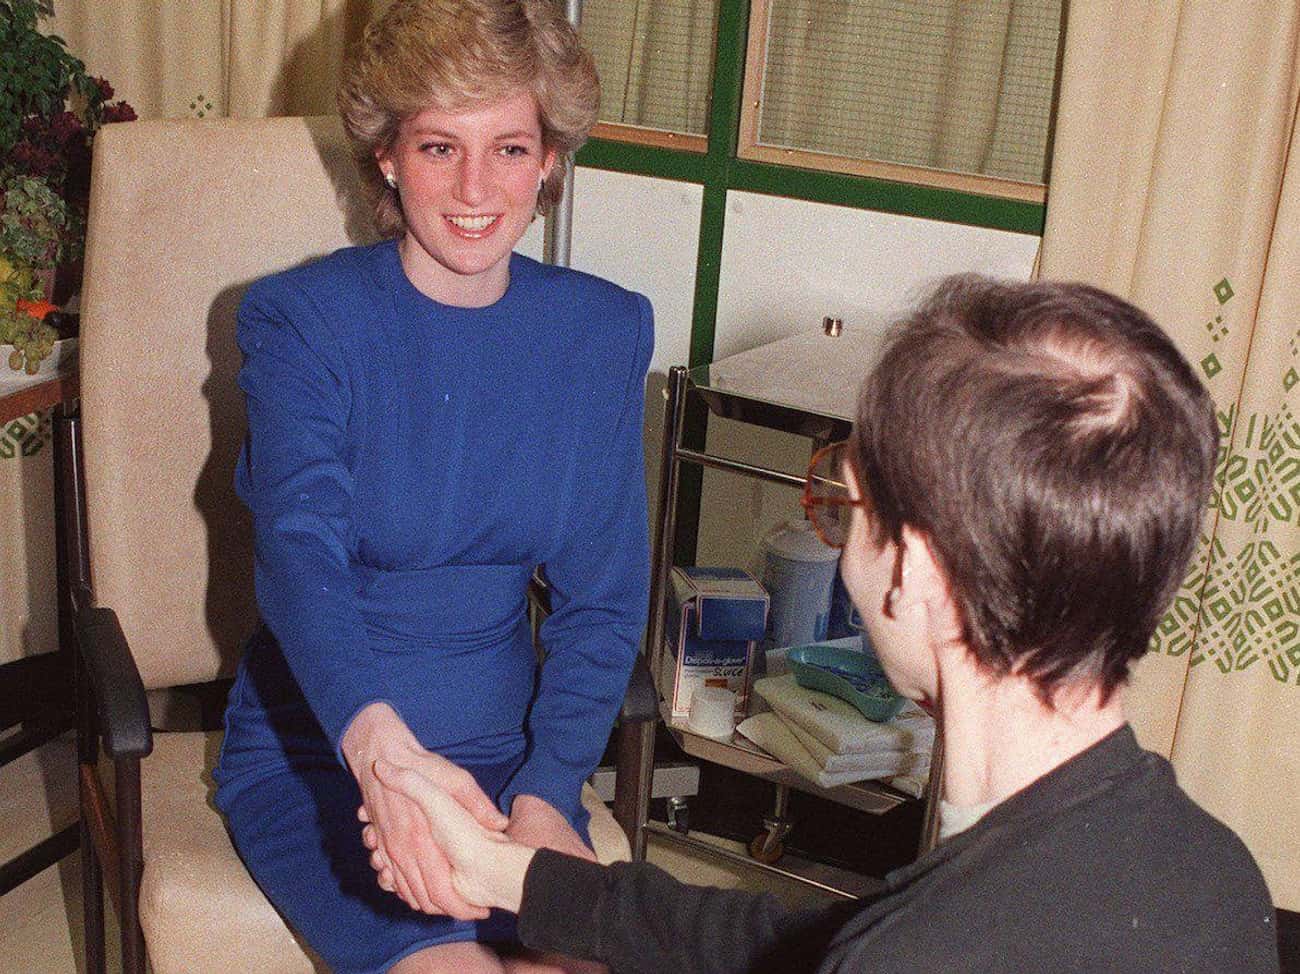 Princess Diana Challenged Myths About AIDS By Shaking Hands With An AIDS Patient